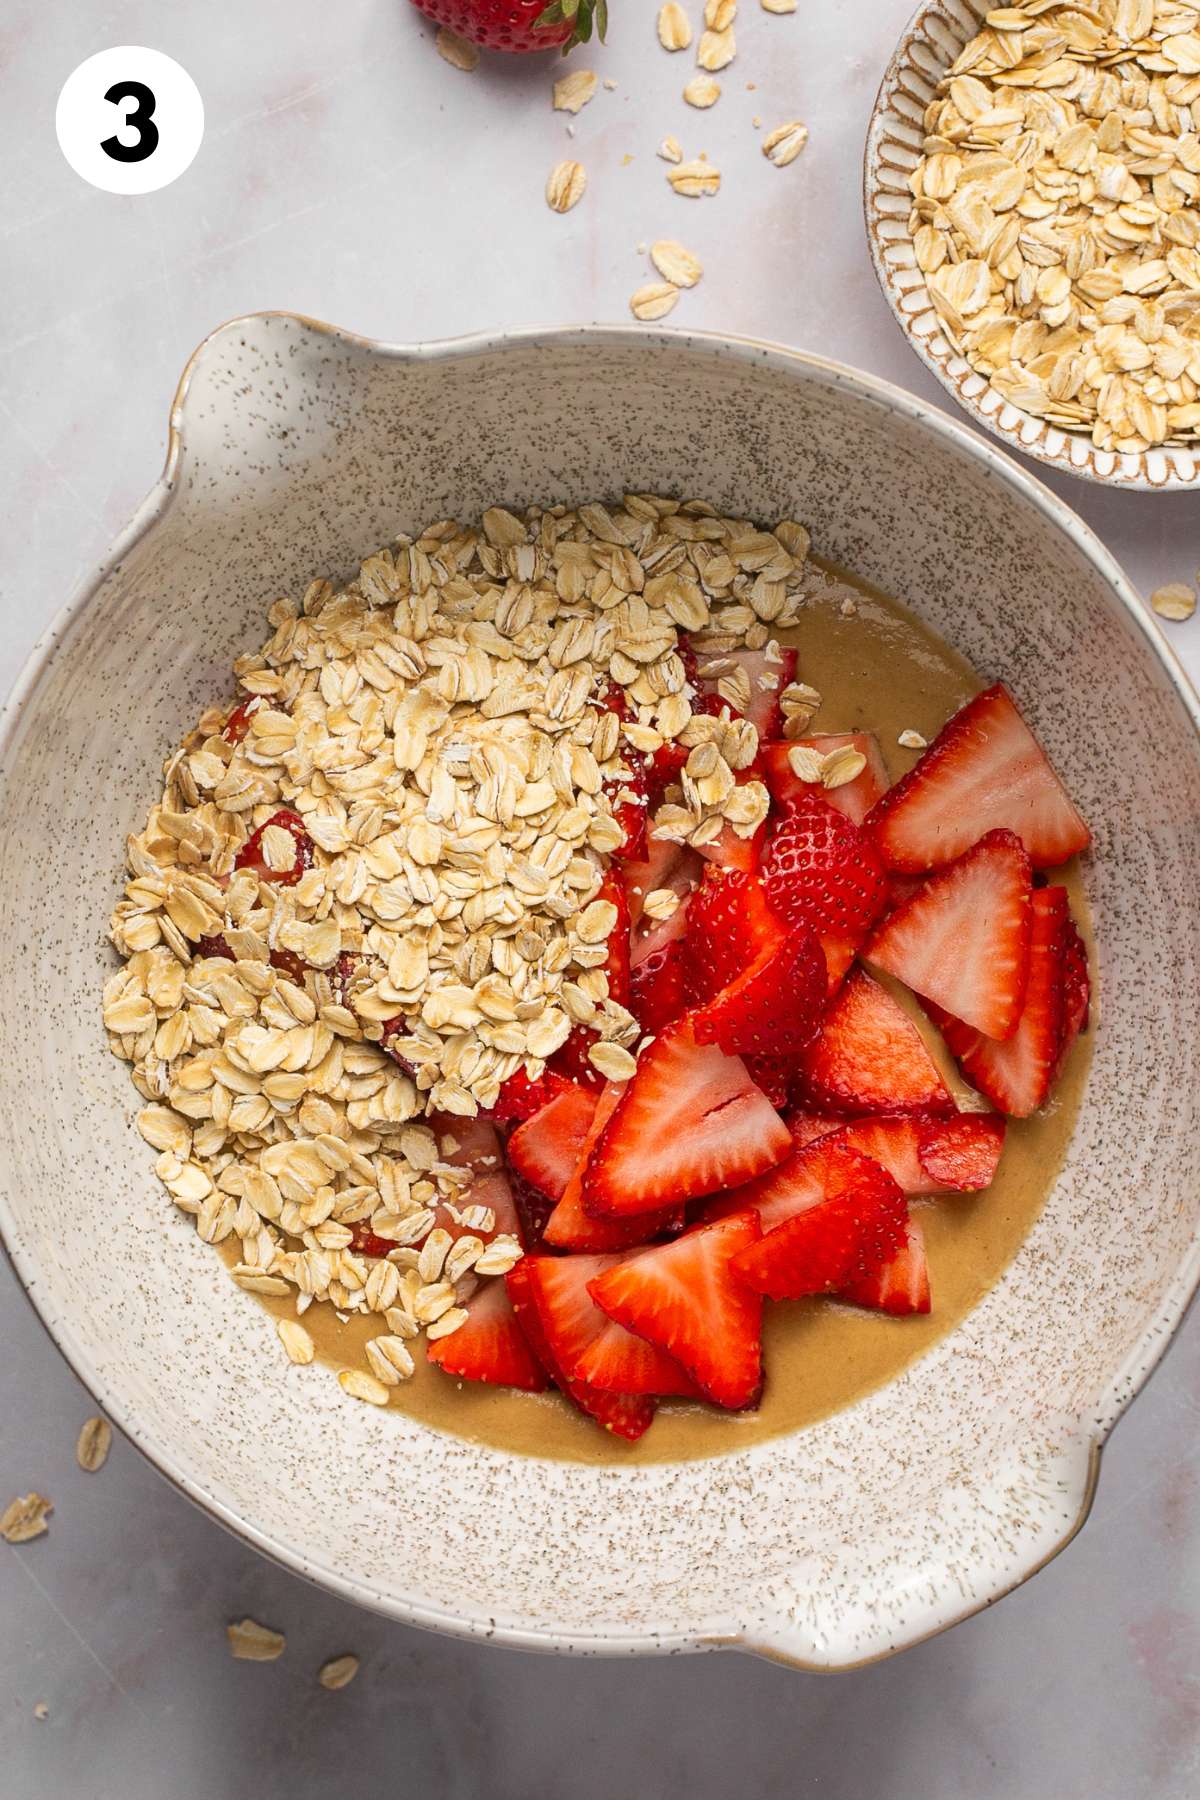 Oats and strawberries are added to the bowl of cookie batter.